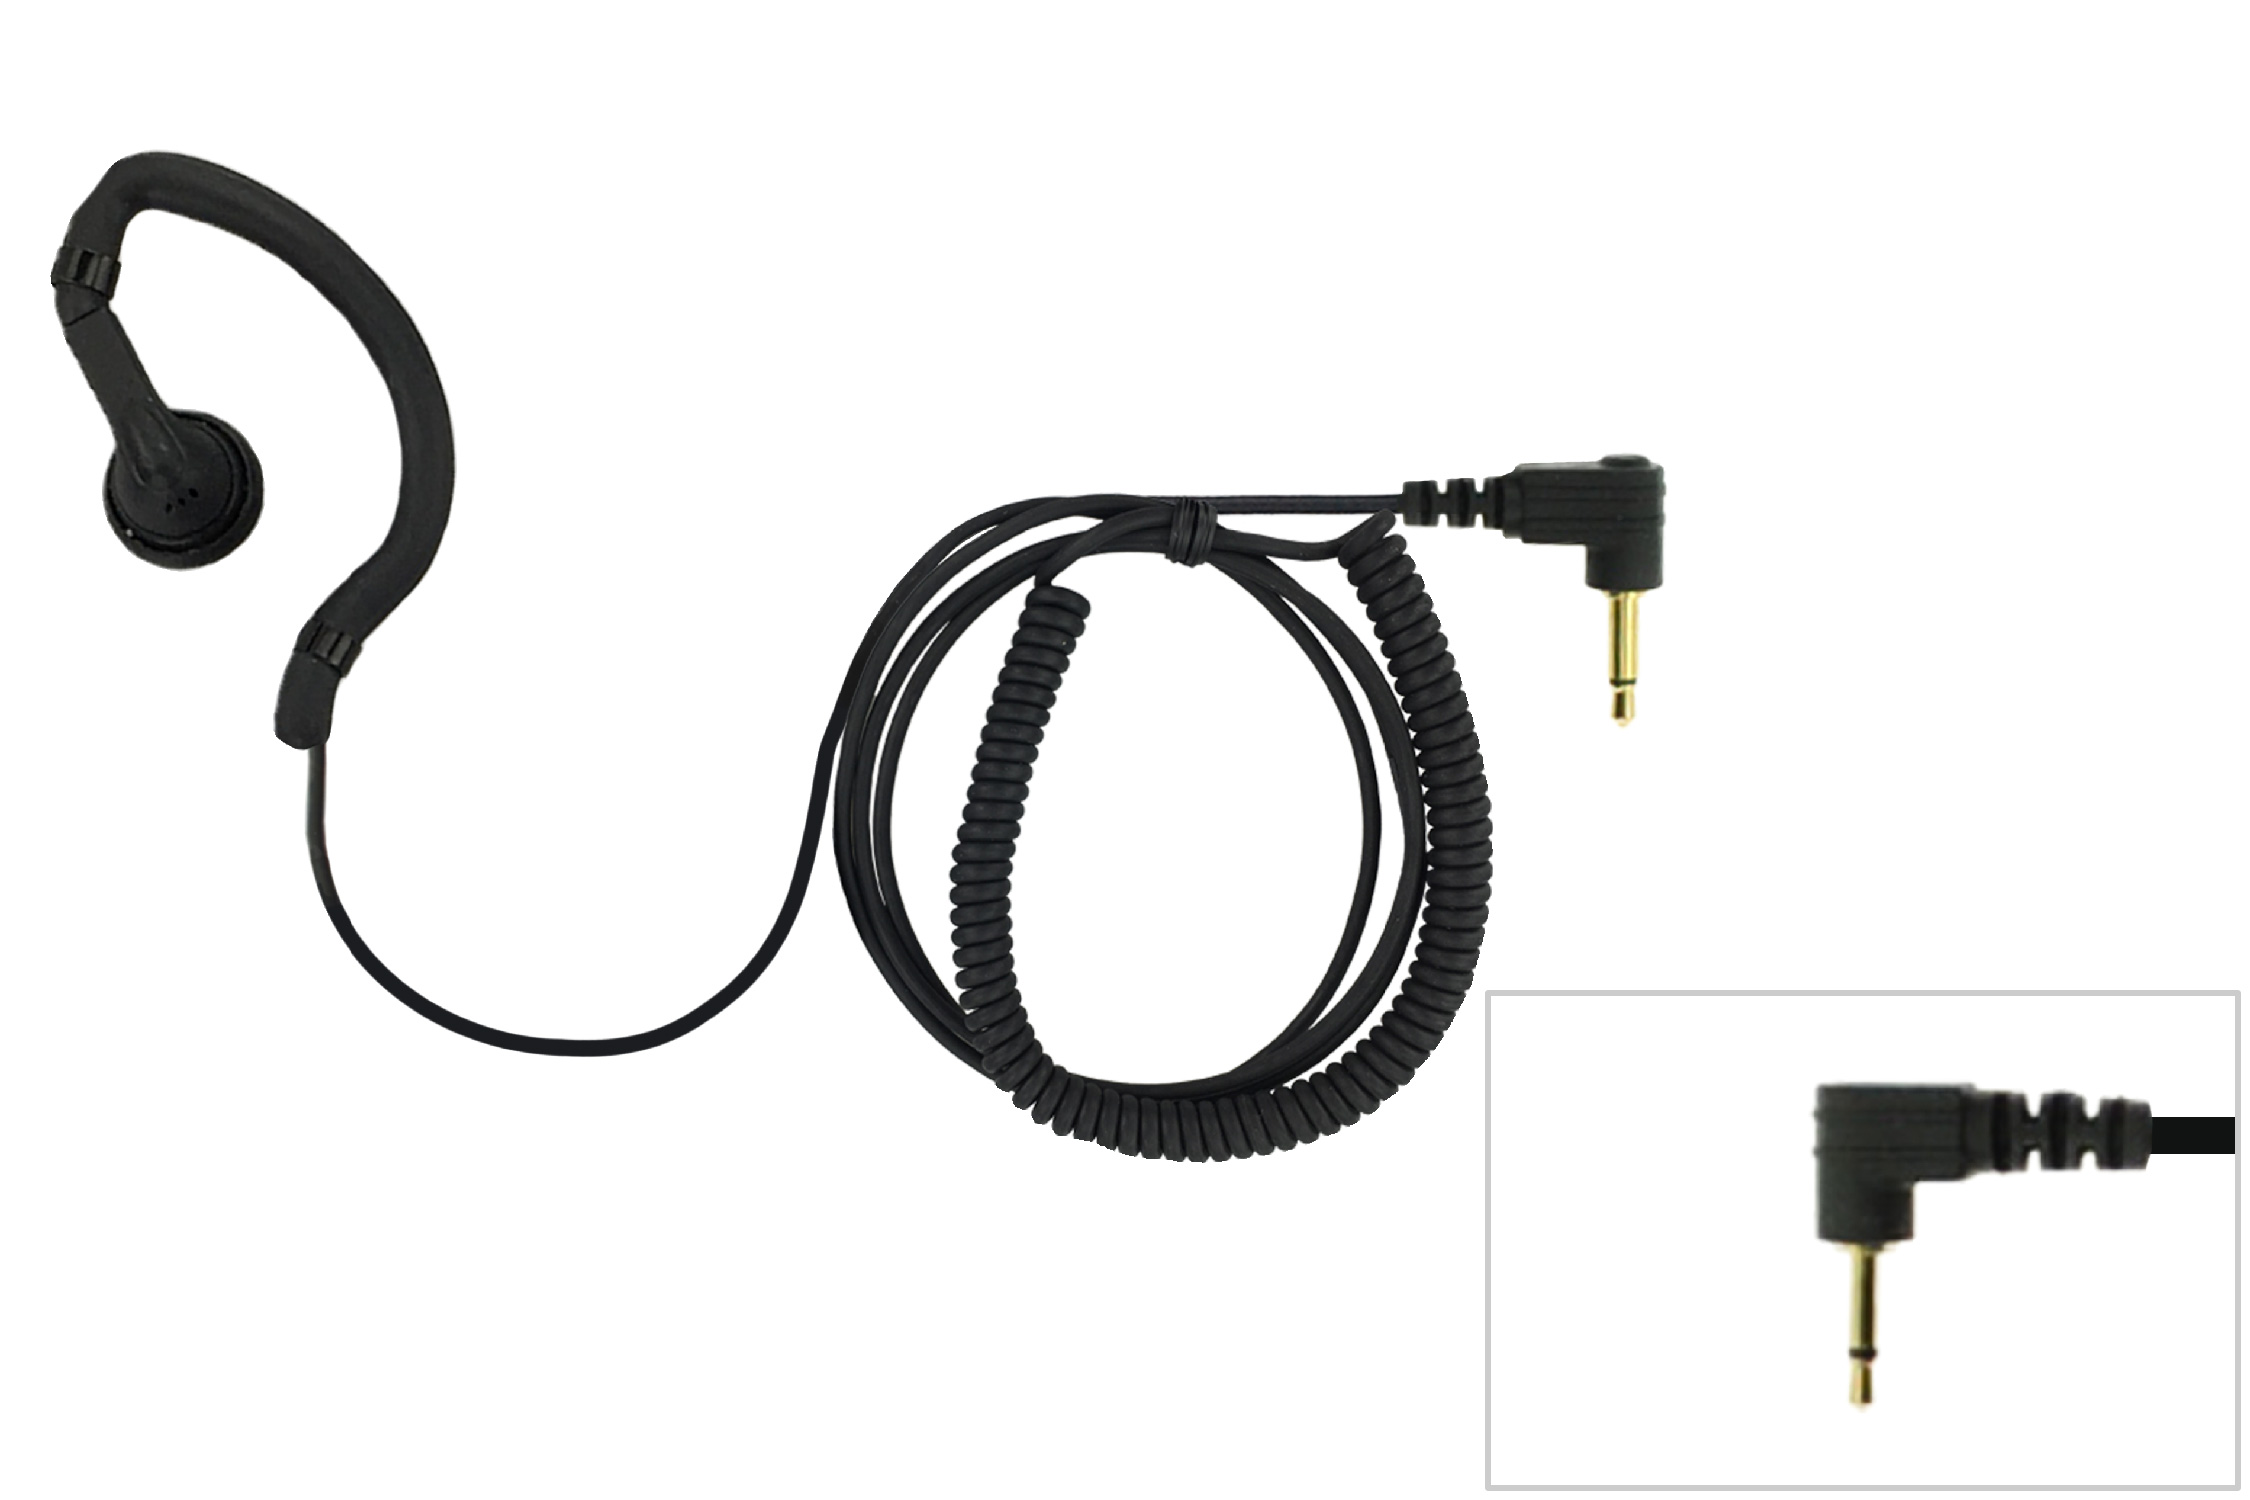 Earbud earpiece for RSM or radio with 2.5mm plug and long cable